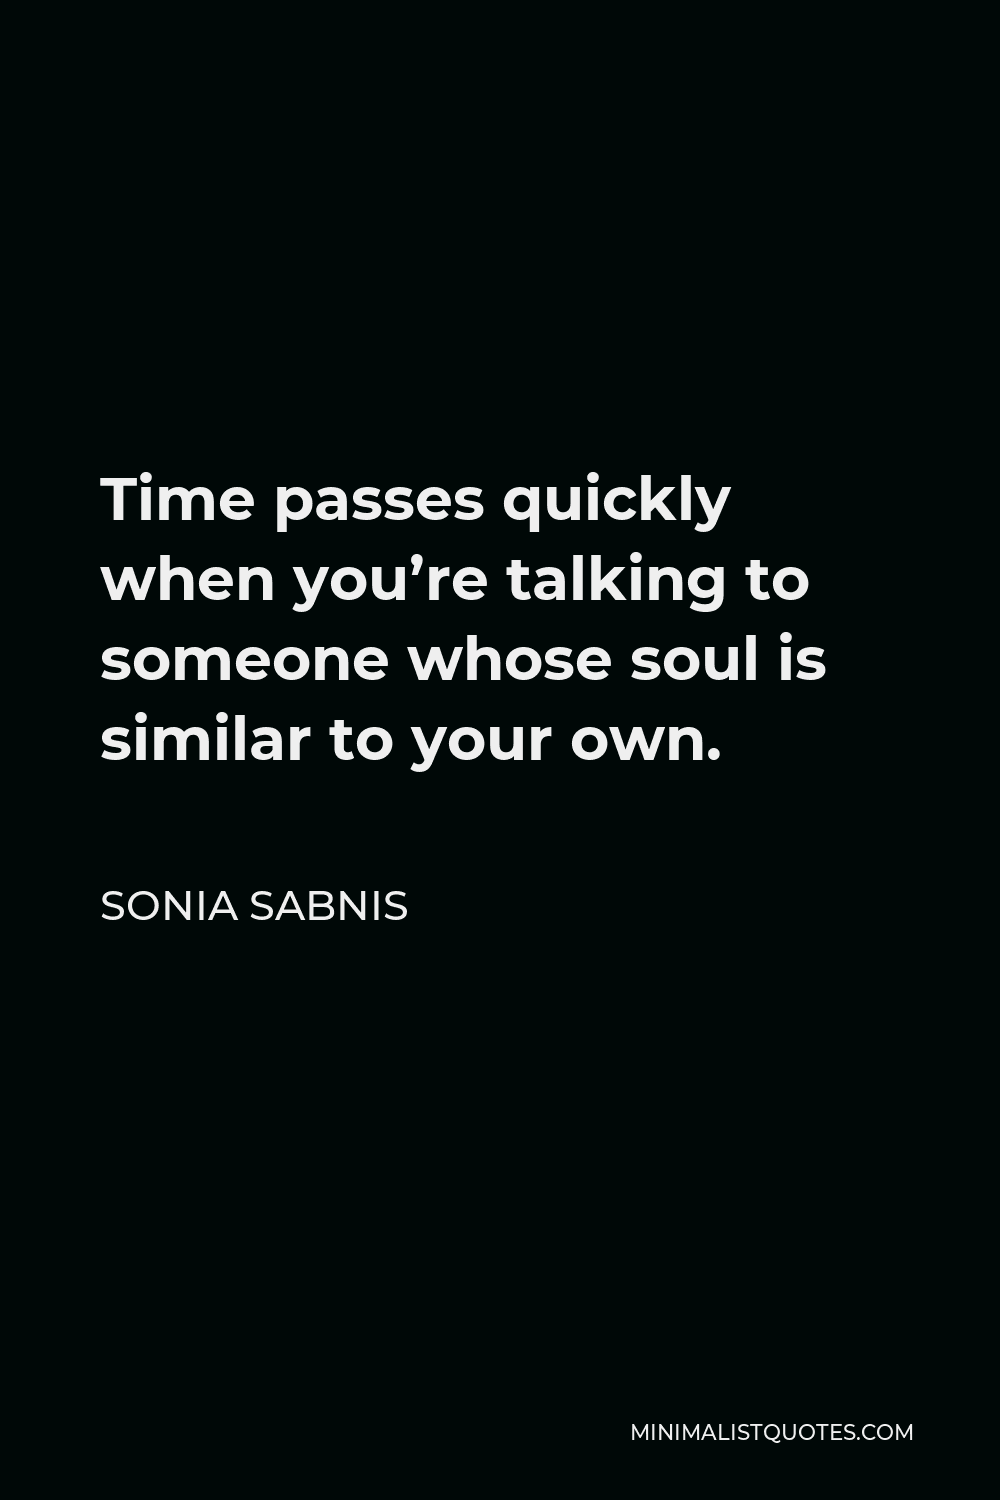 Sonia Sabnis Quote - Time passes quickly when you’re talking to someone whose soul is similar to your own.